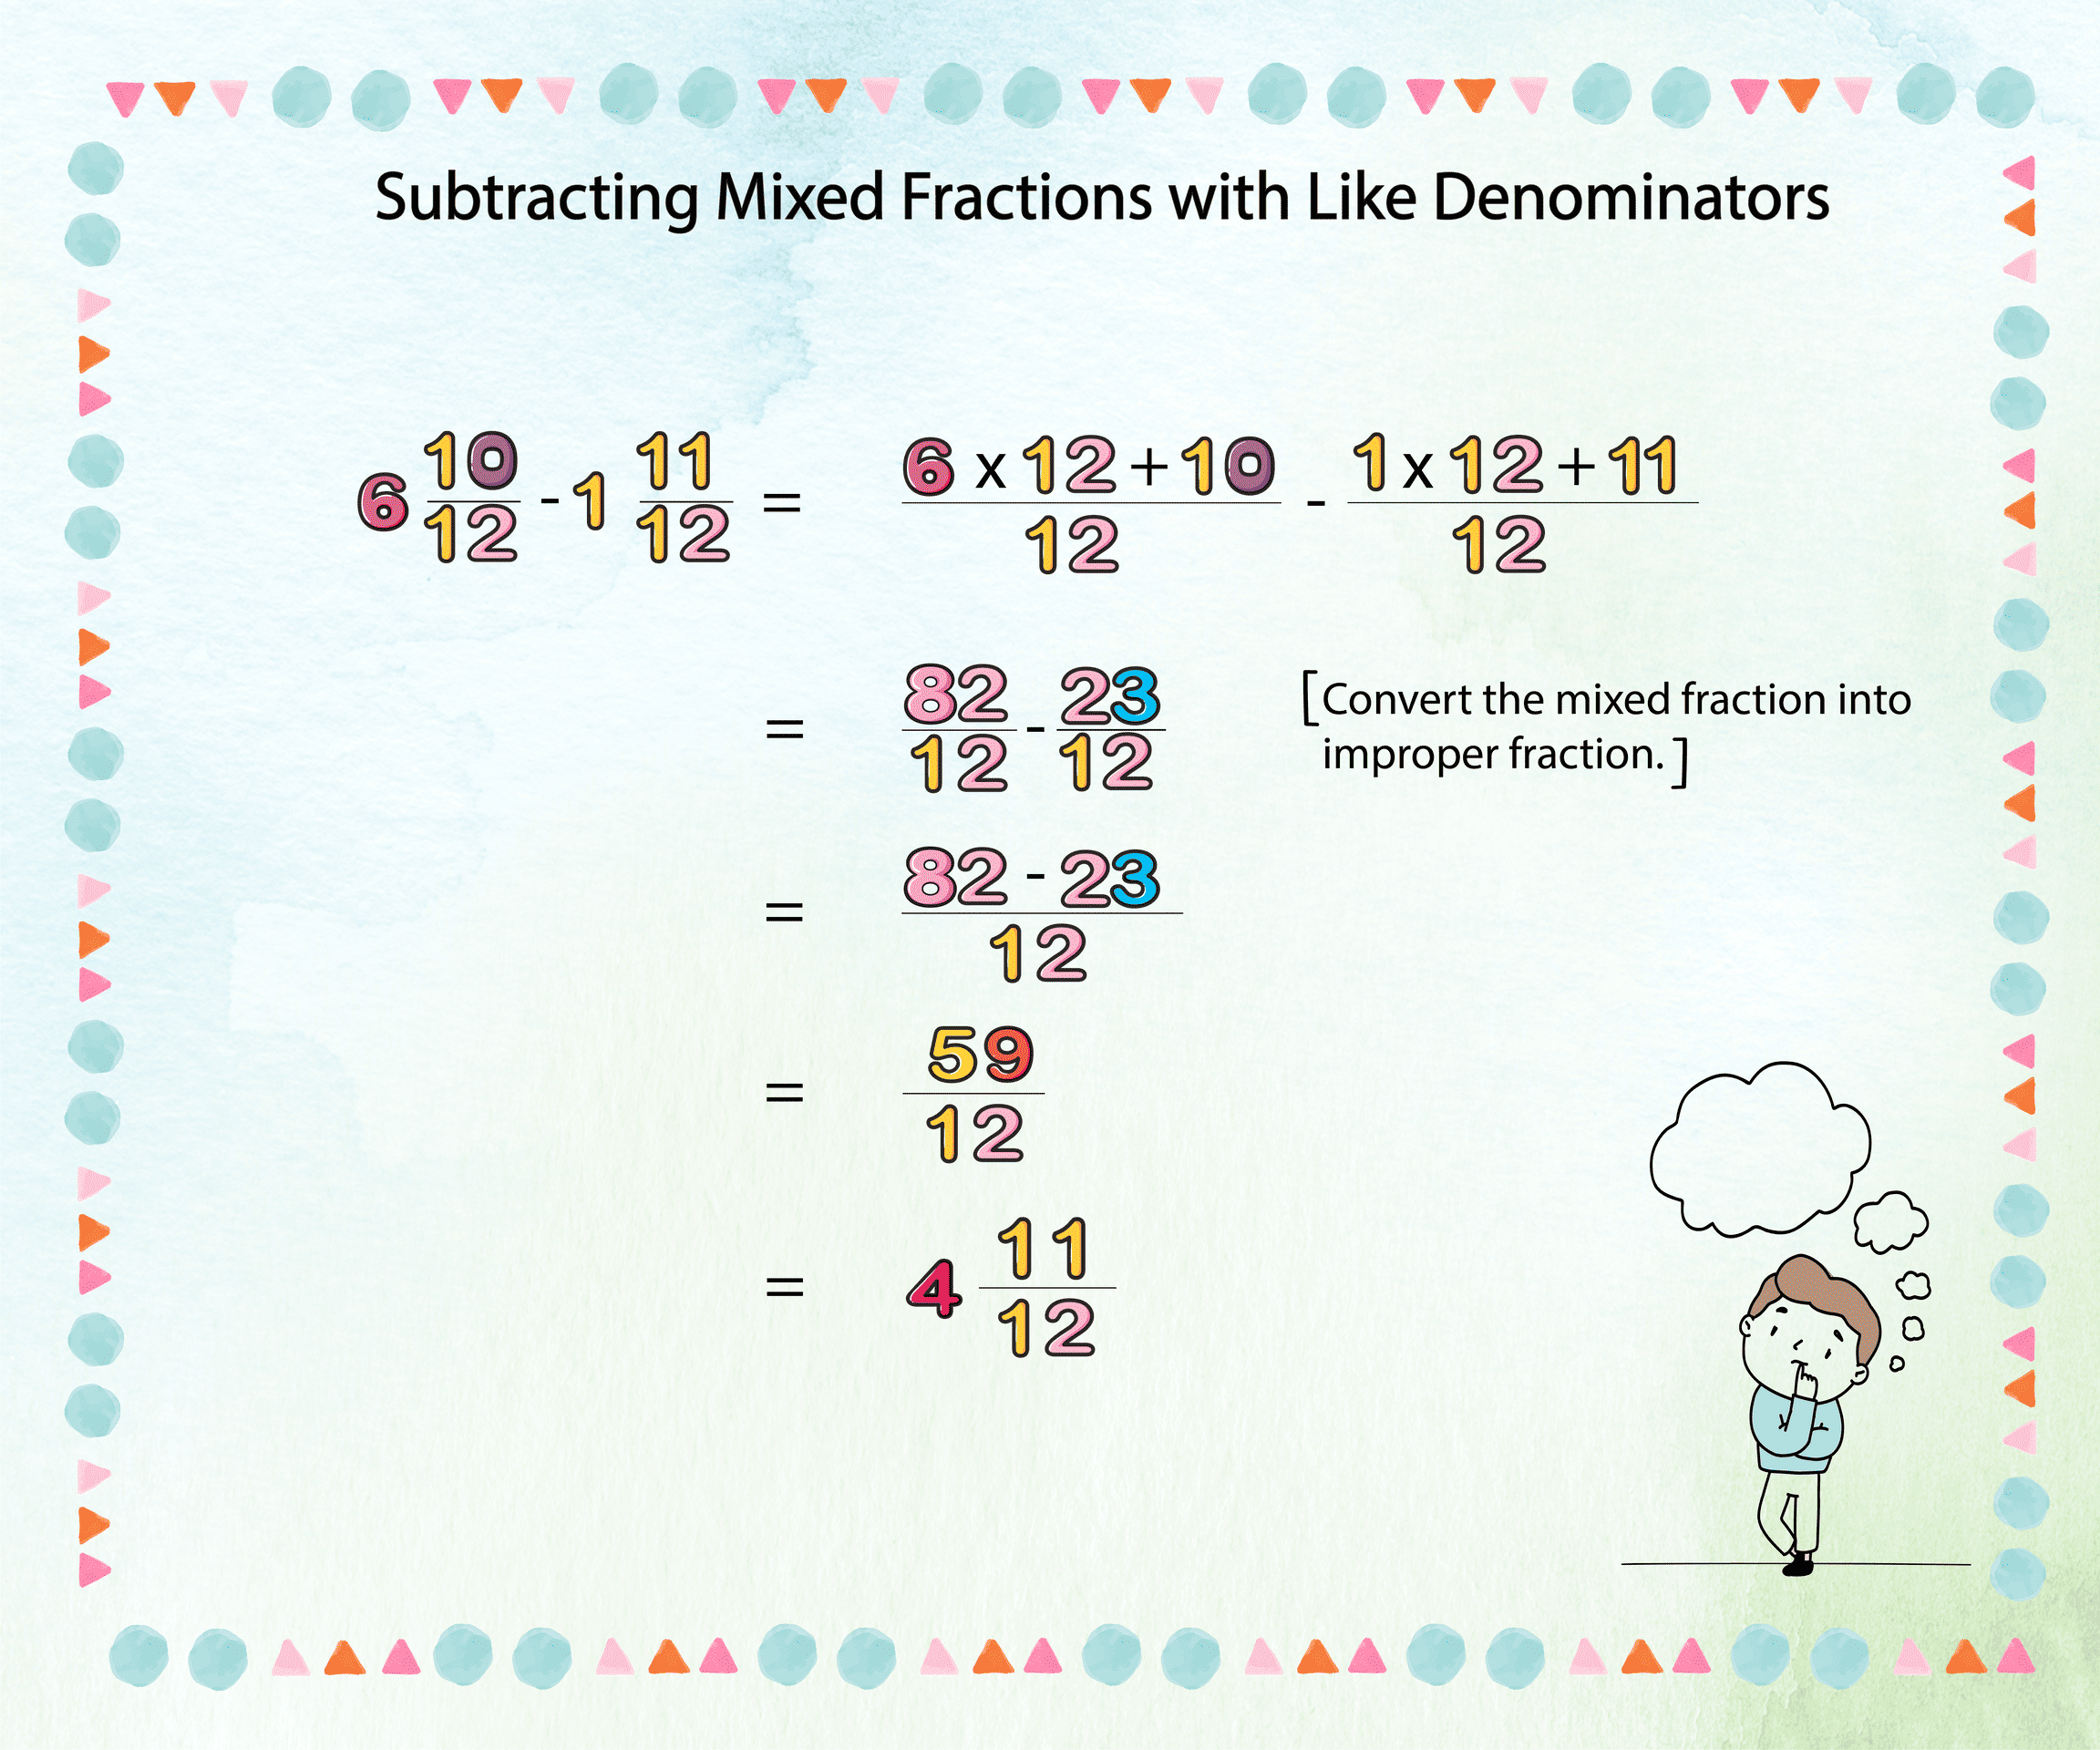 Subtracting Mixed Fractions with Like Denominators